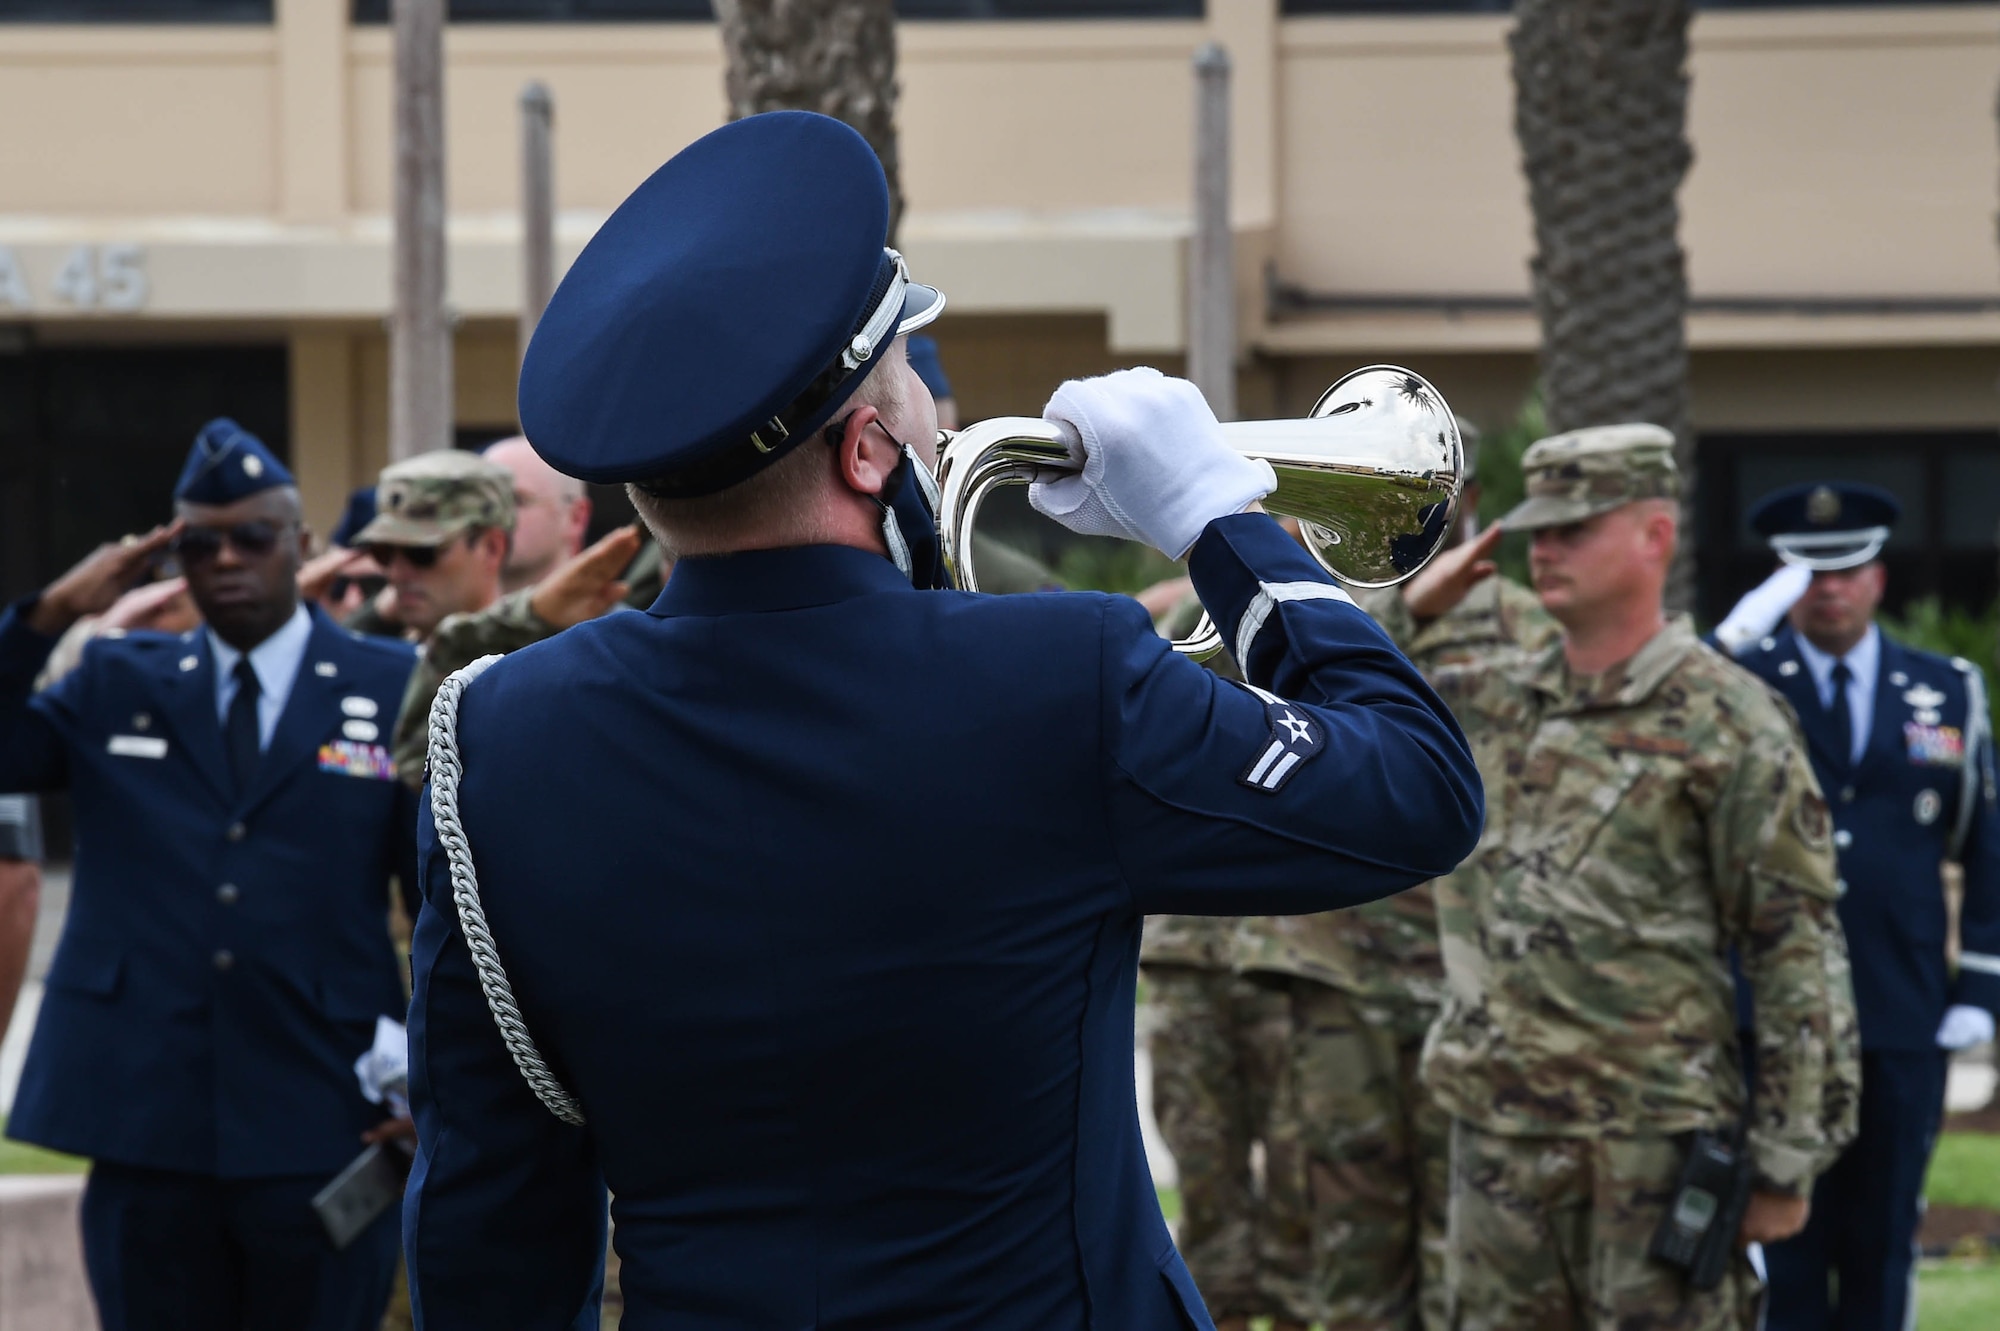 An Airman plays Taps at a memorial ceremony